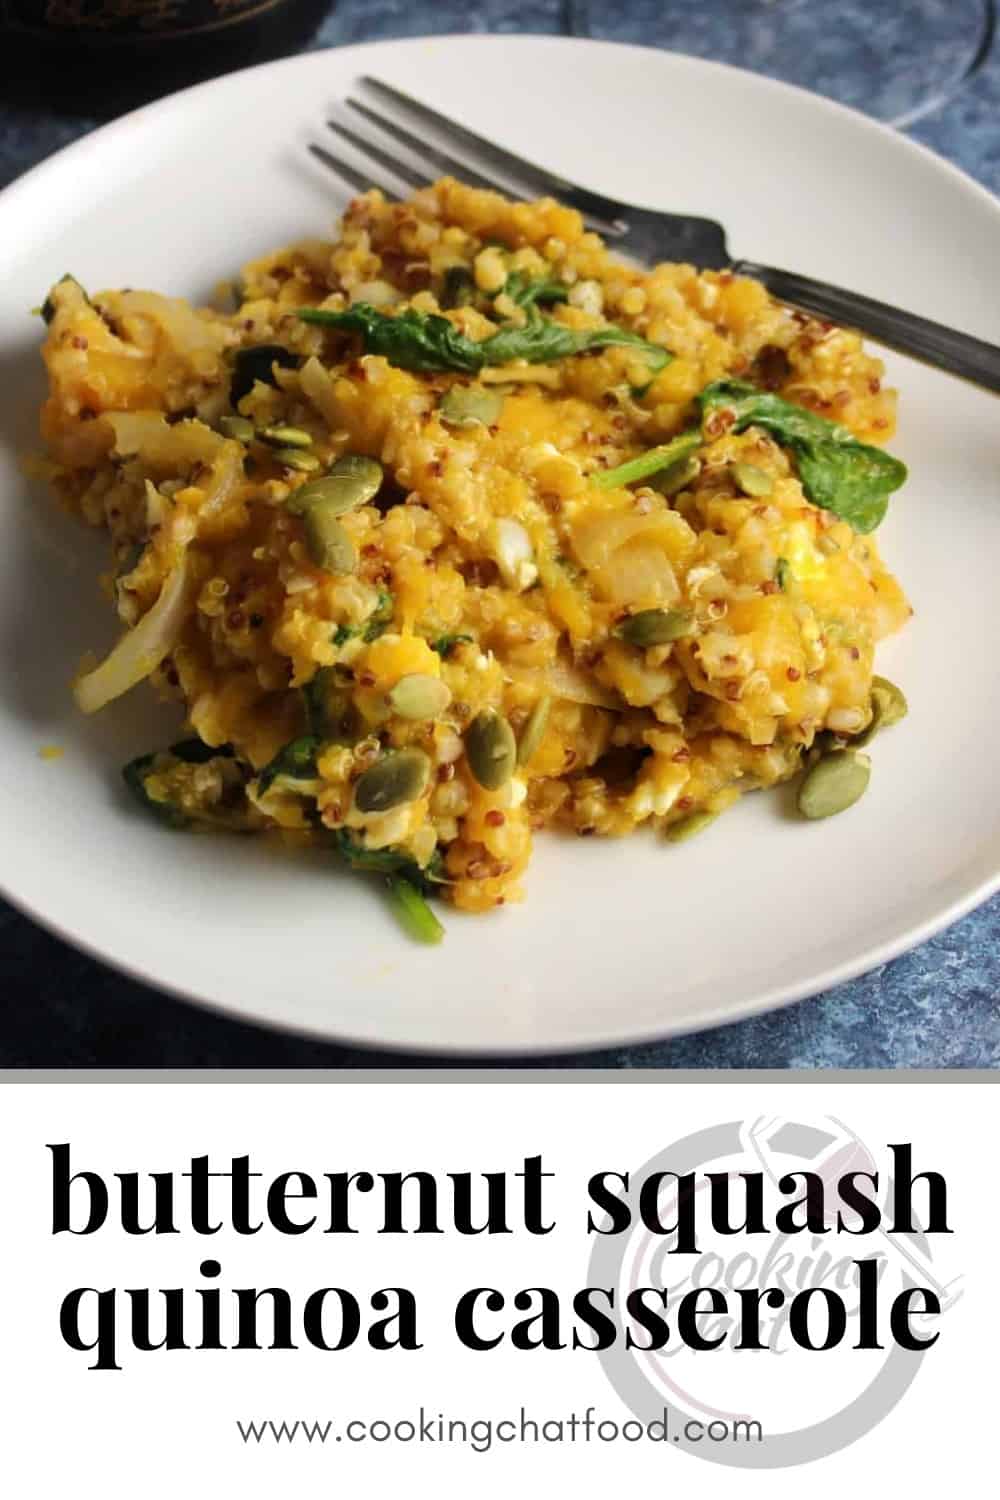 butternut squash and quinoa casserole on a white plate, with text underneath naming the recipe.